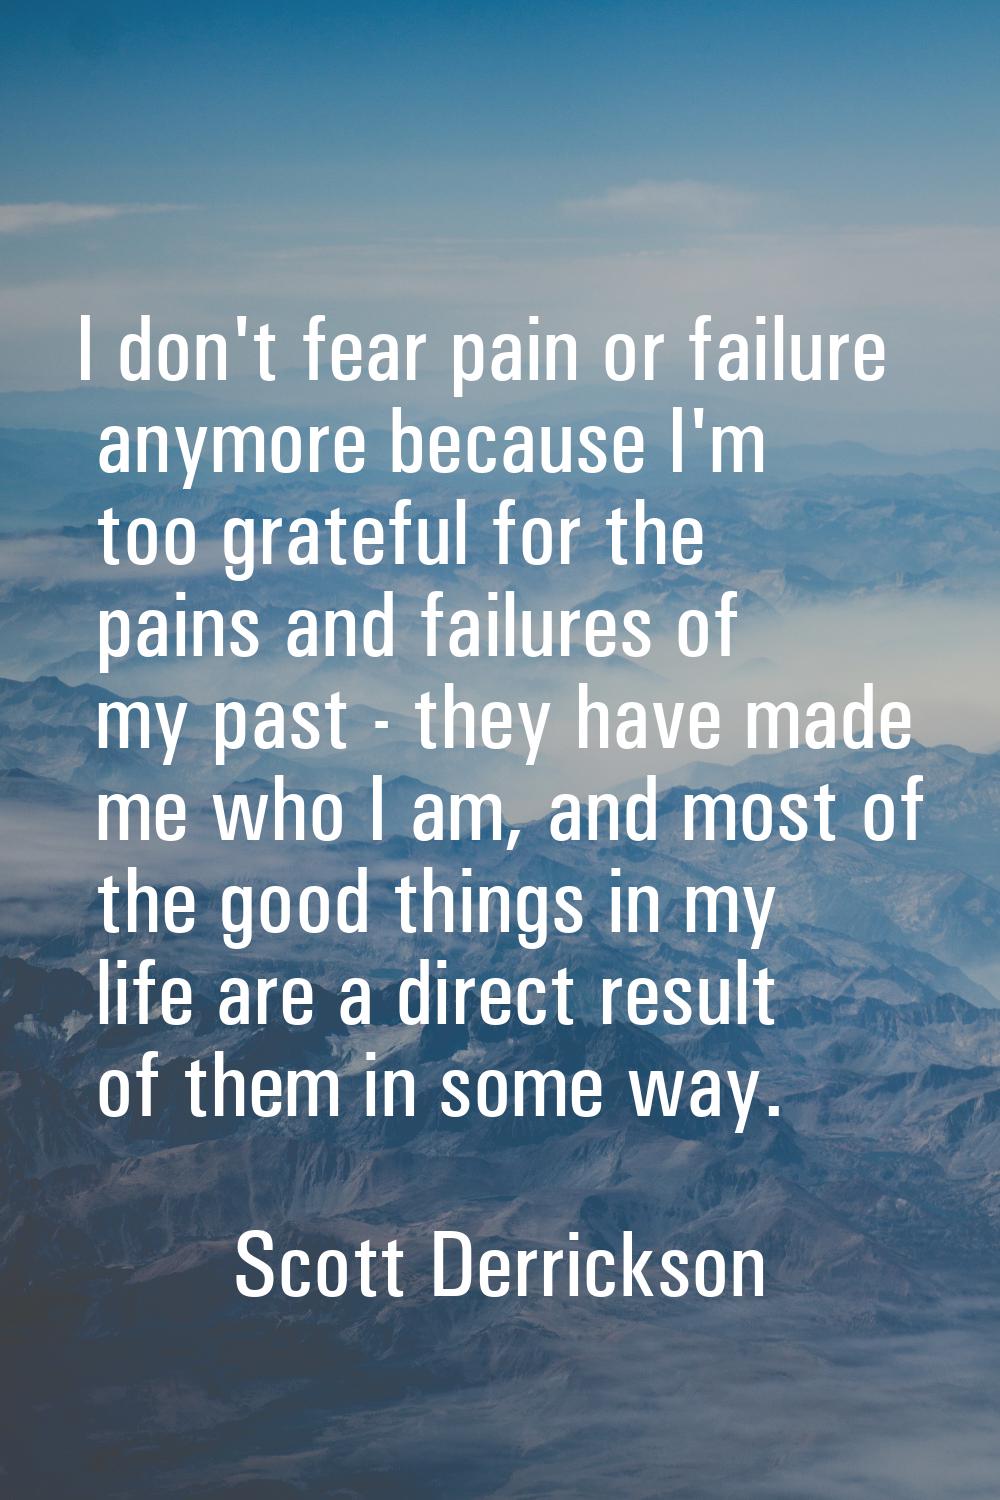 I don't fear pain or failure anymore because I'm too grateful for the pains and failures of my past